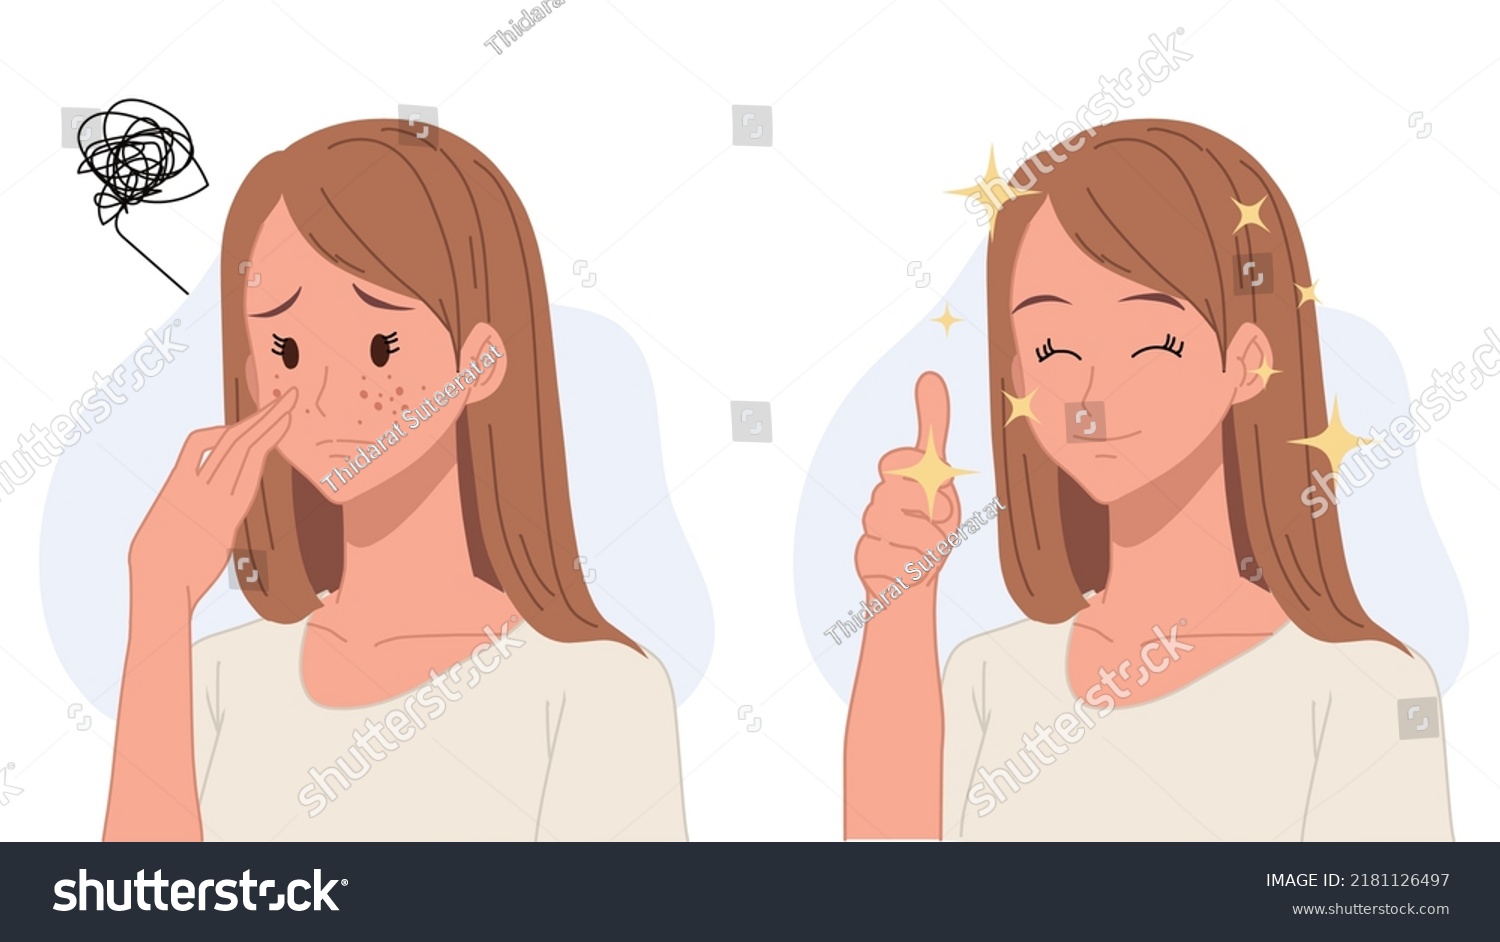 SVG of Skin care concept.woman,girl with acne.Before and after acne.Flat vector 2d cartoon character illustration. svg